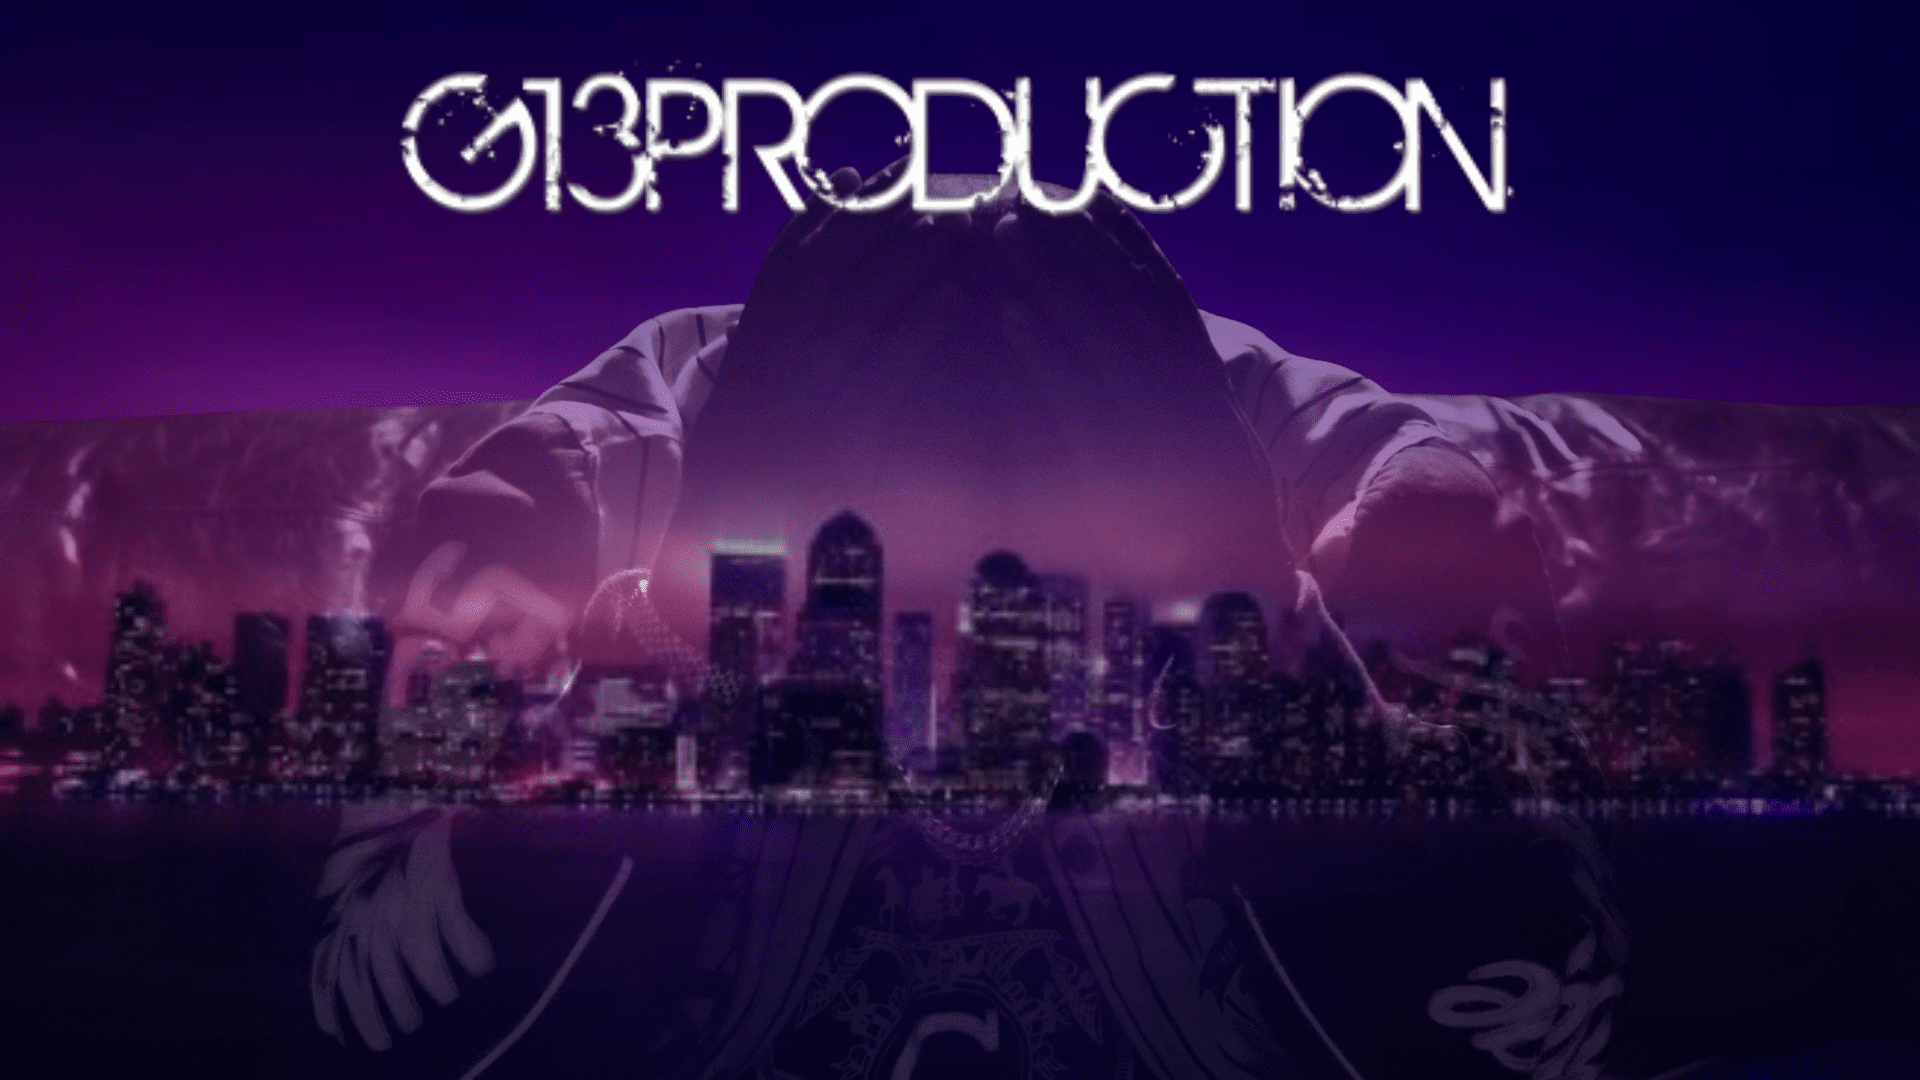 A purple and black image of the city skyline.